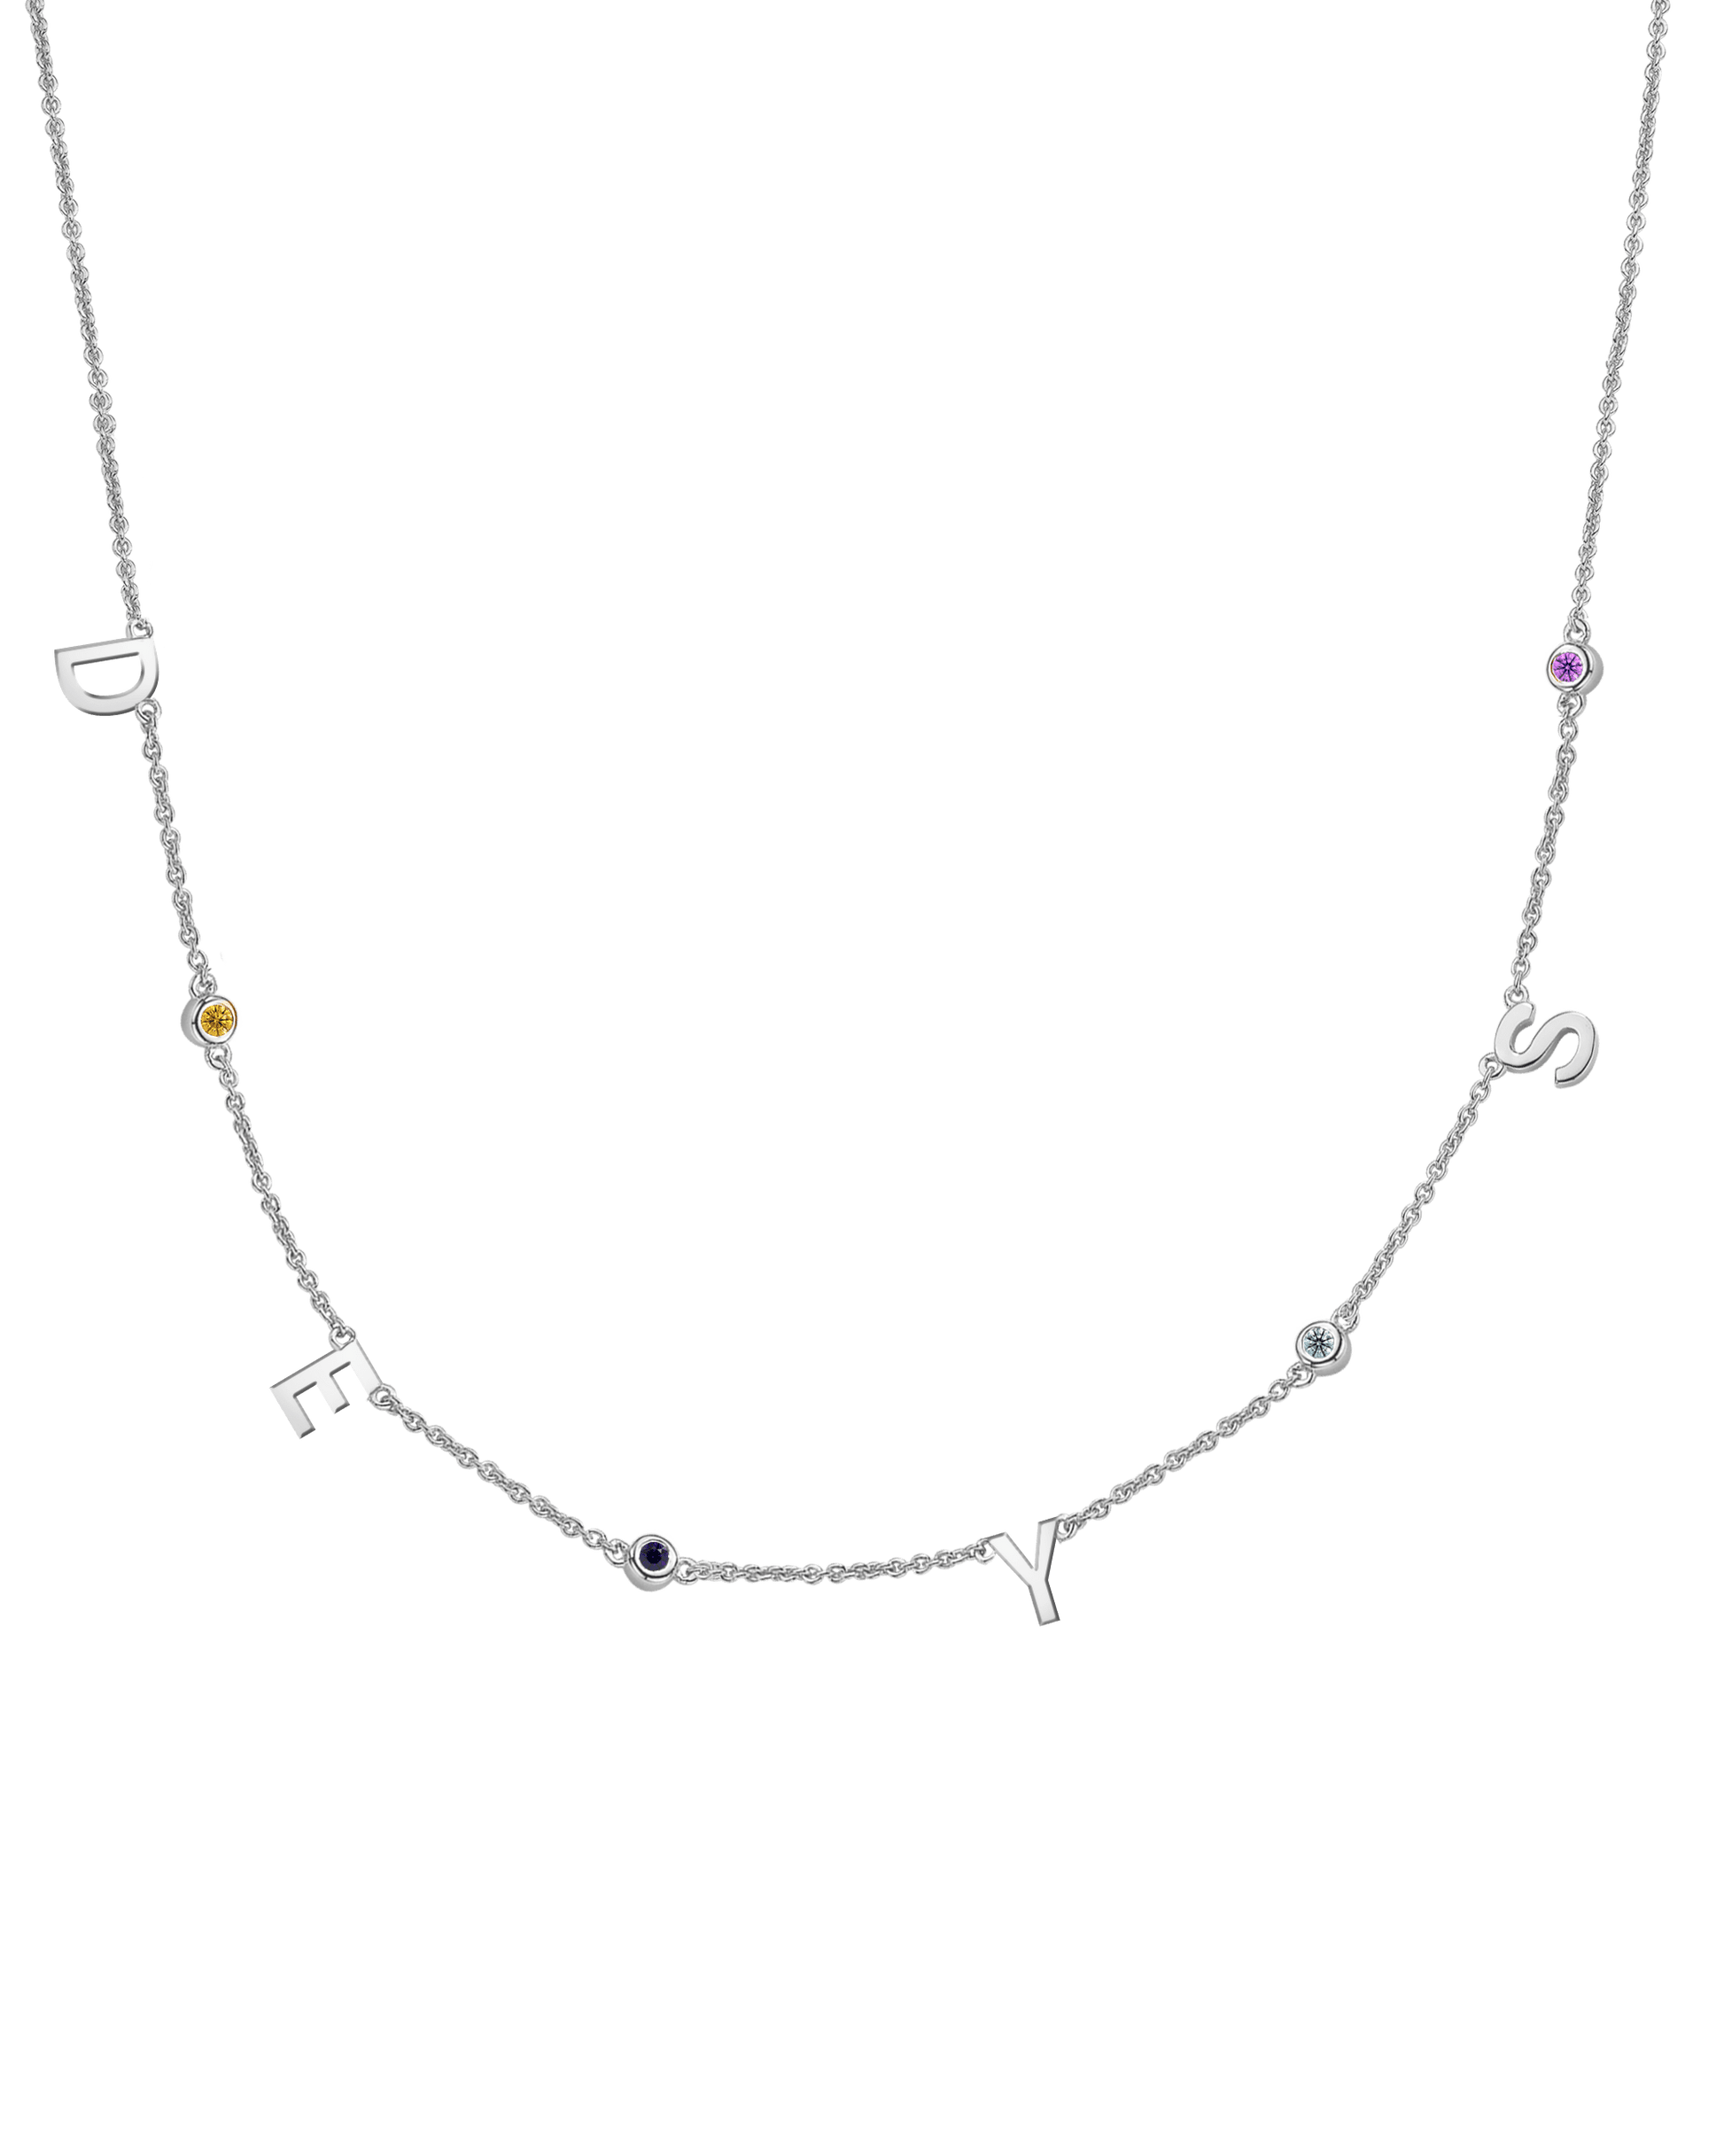 Initial Birthstone Necklace - 14K White Gold Necklaces magal-dev 4 Initials + 4 Birthstones Adjustable 16-17" (40cm-43cm) 